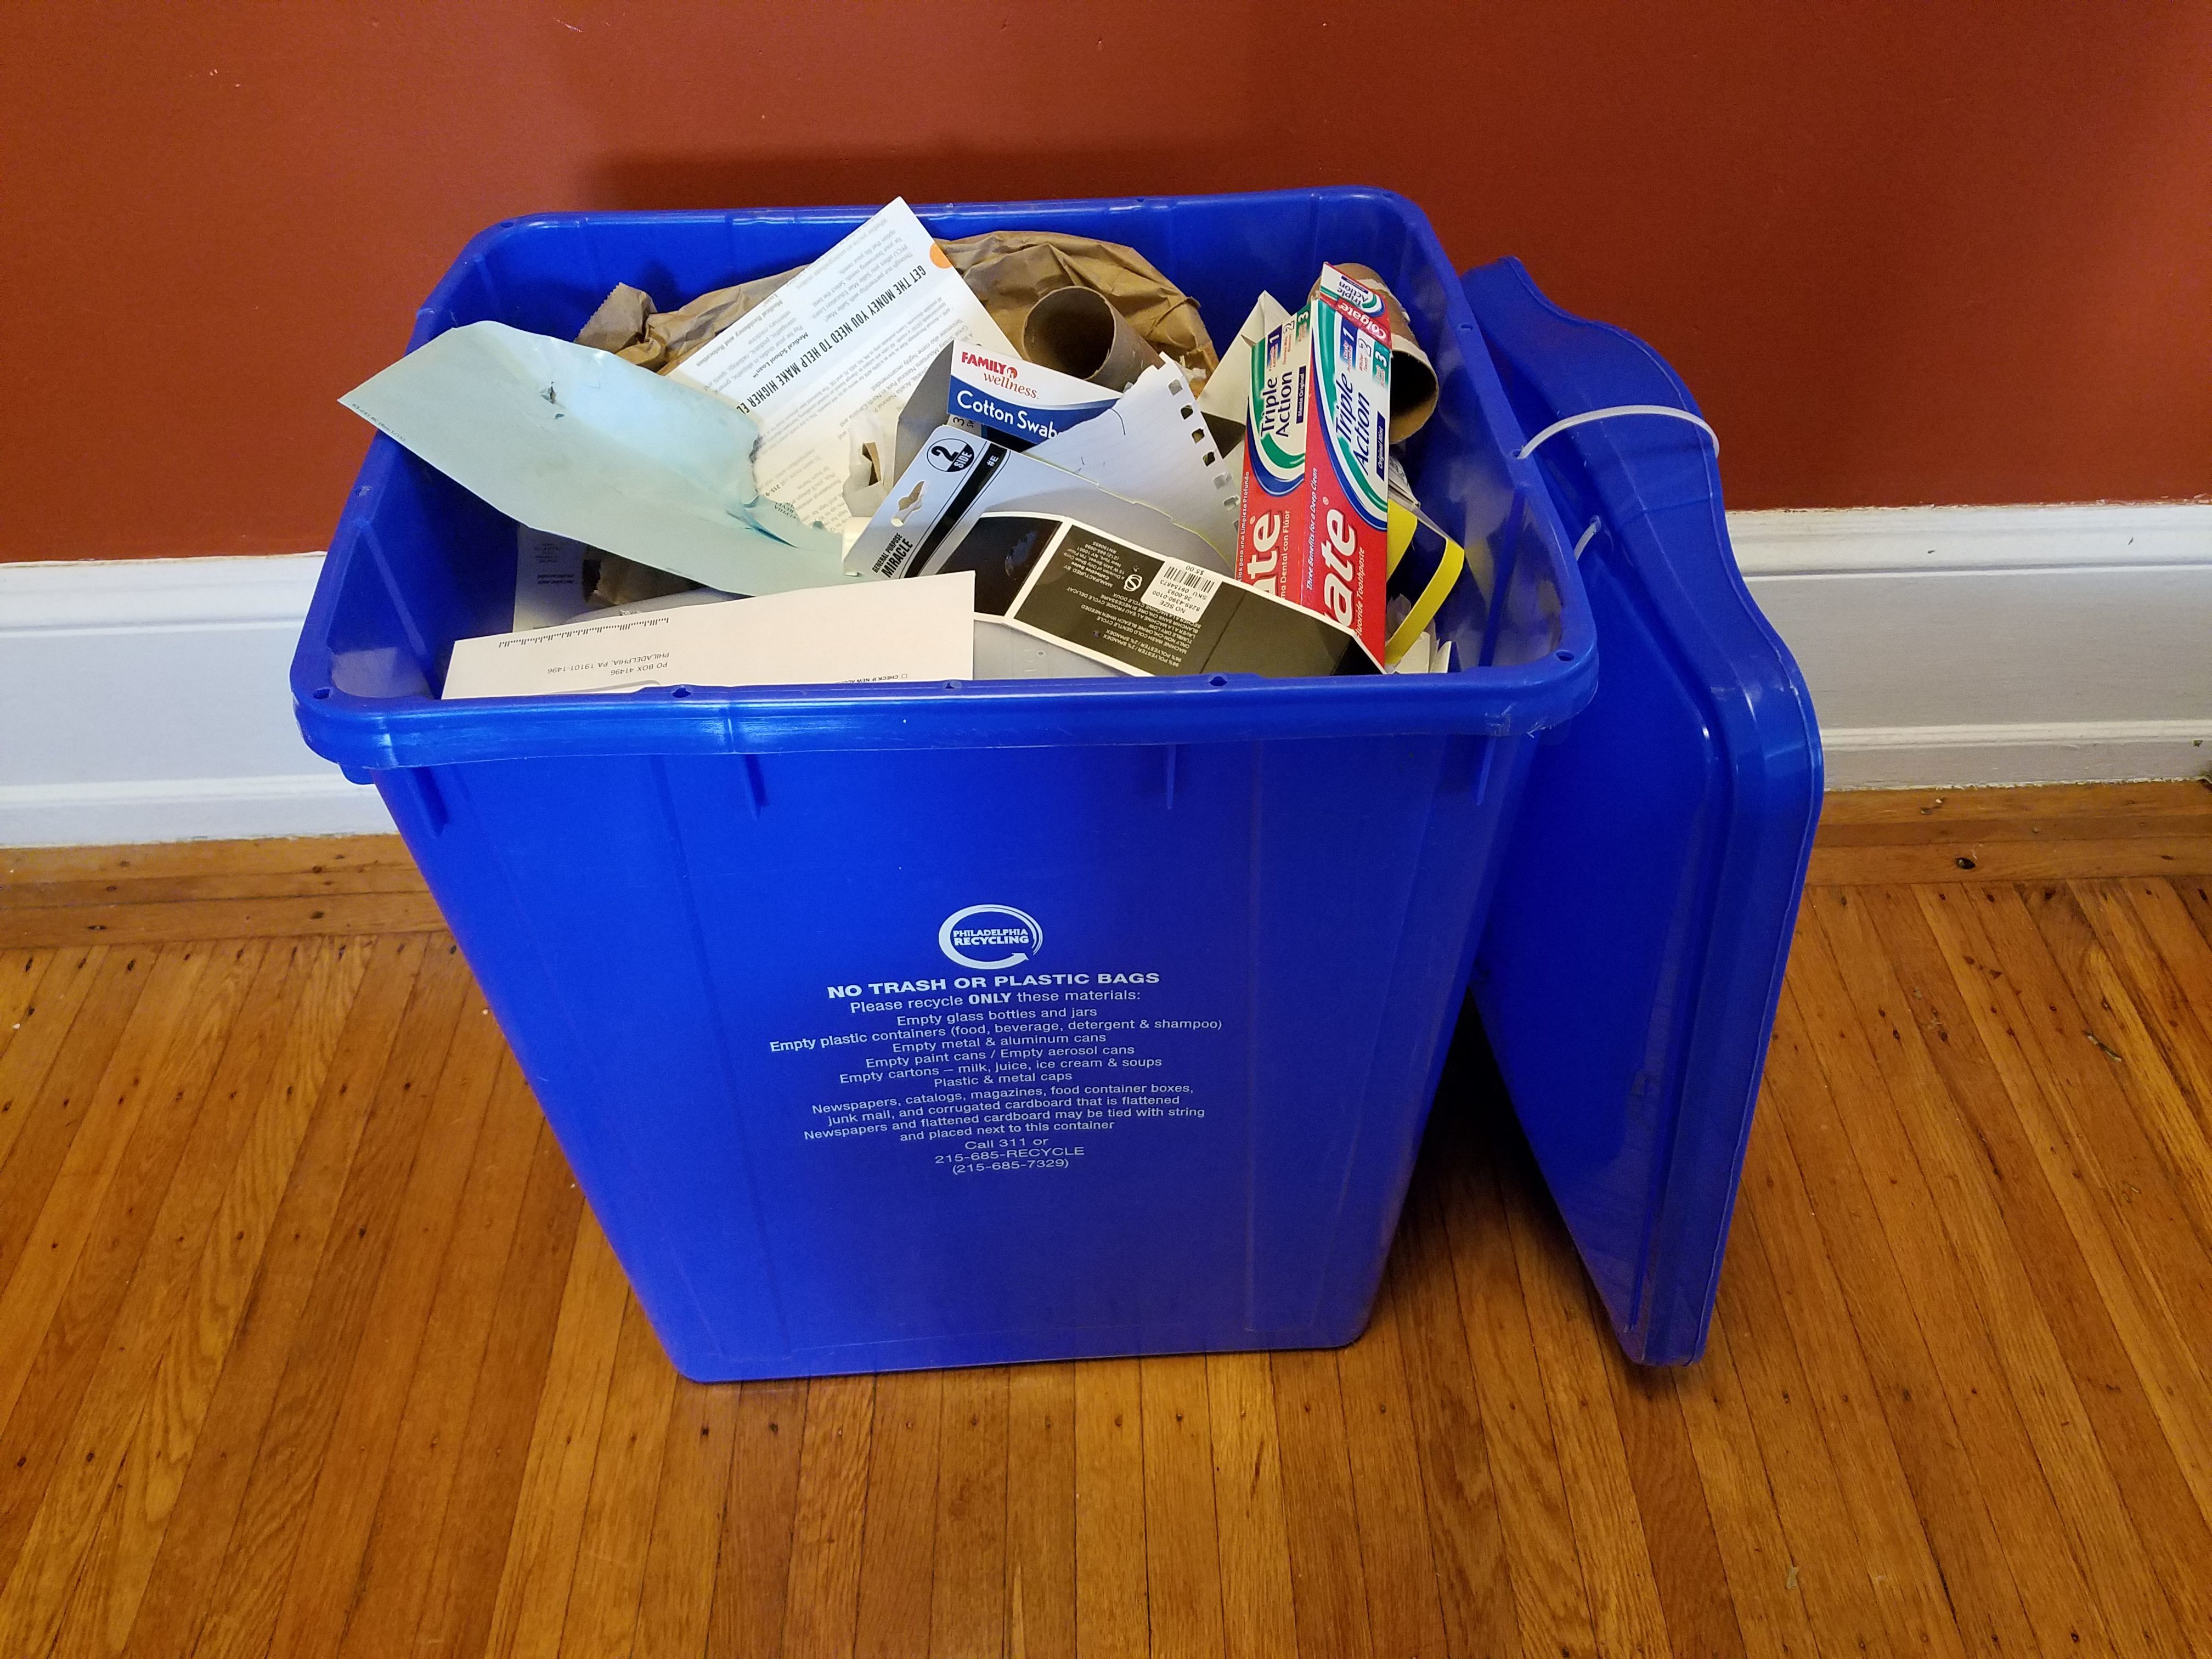 can laminate flooring go in recycling bin?